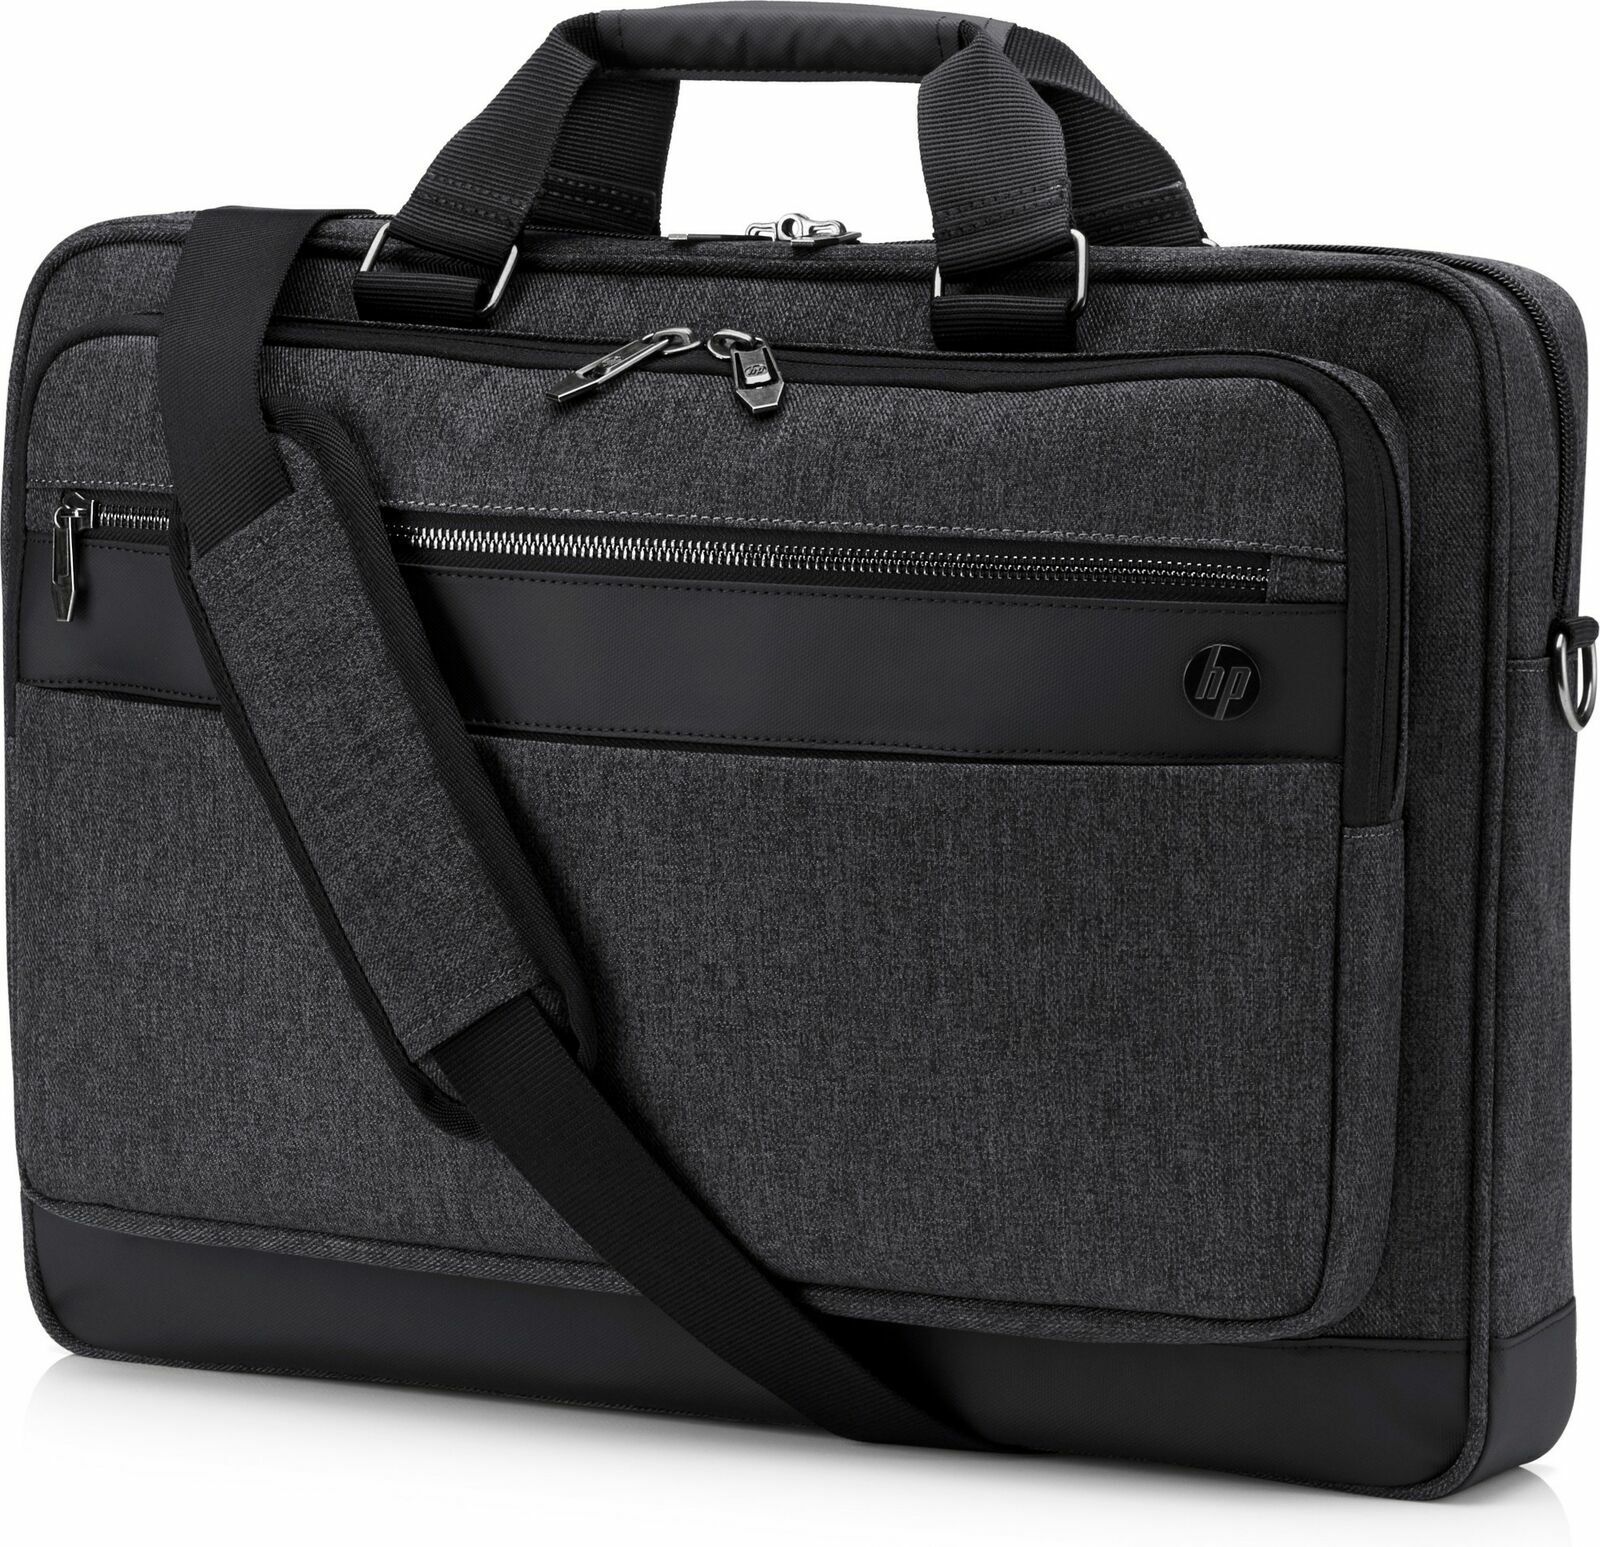 NEW HP Executive 17.3 Top Load notebook/laptop case Zbook 17 - 6KD08UT